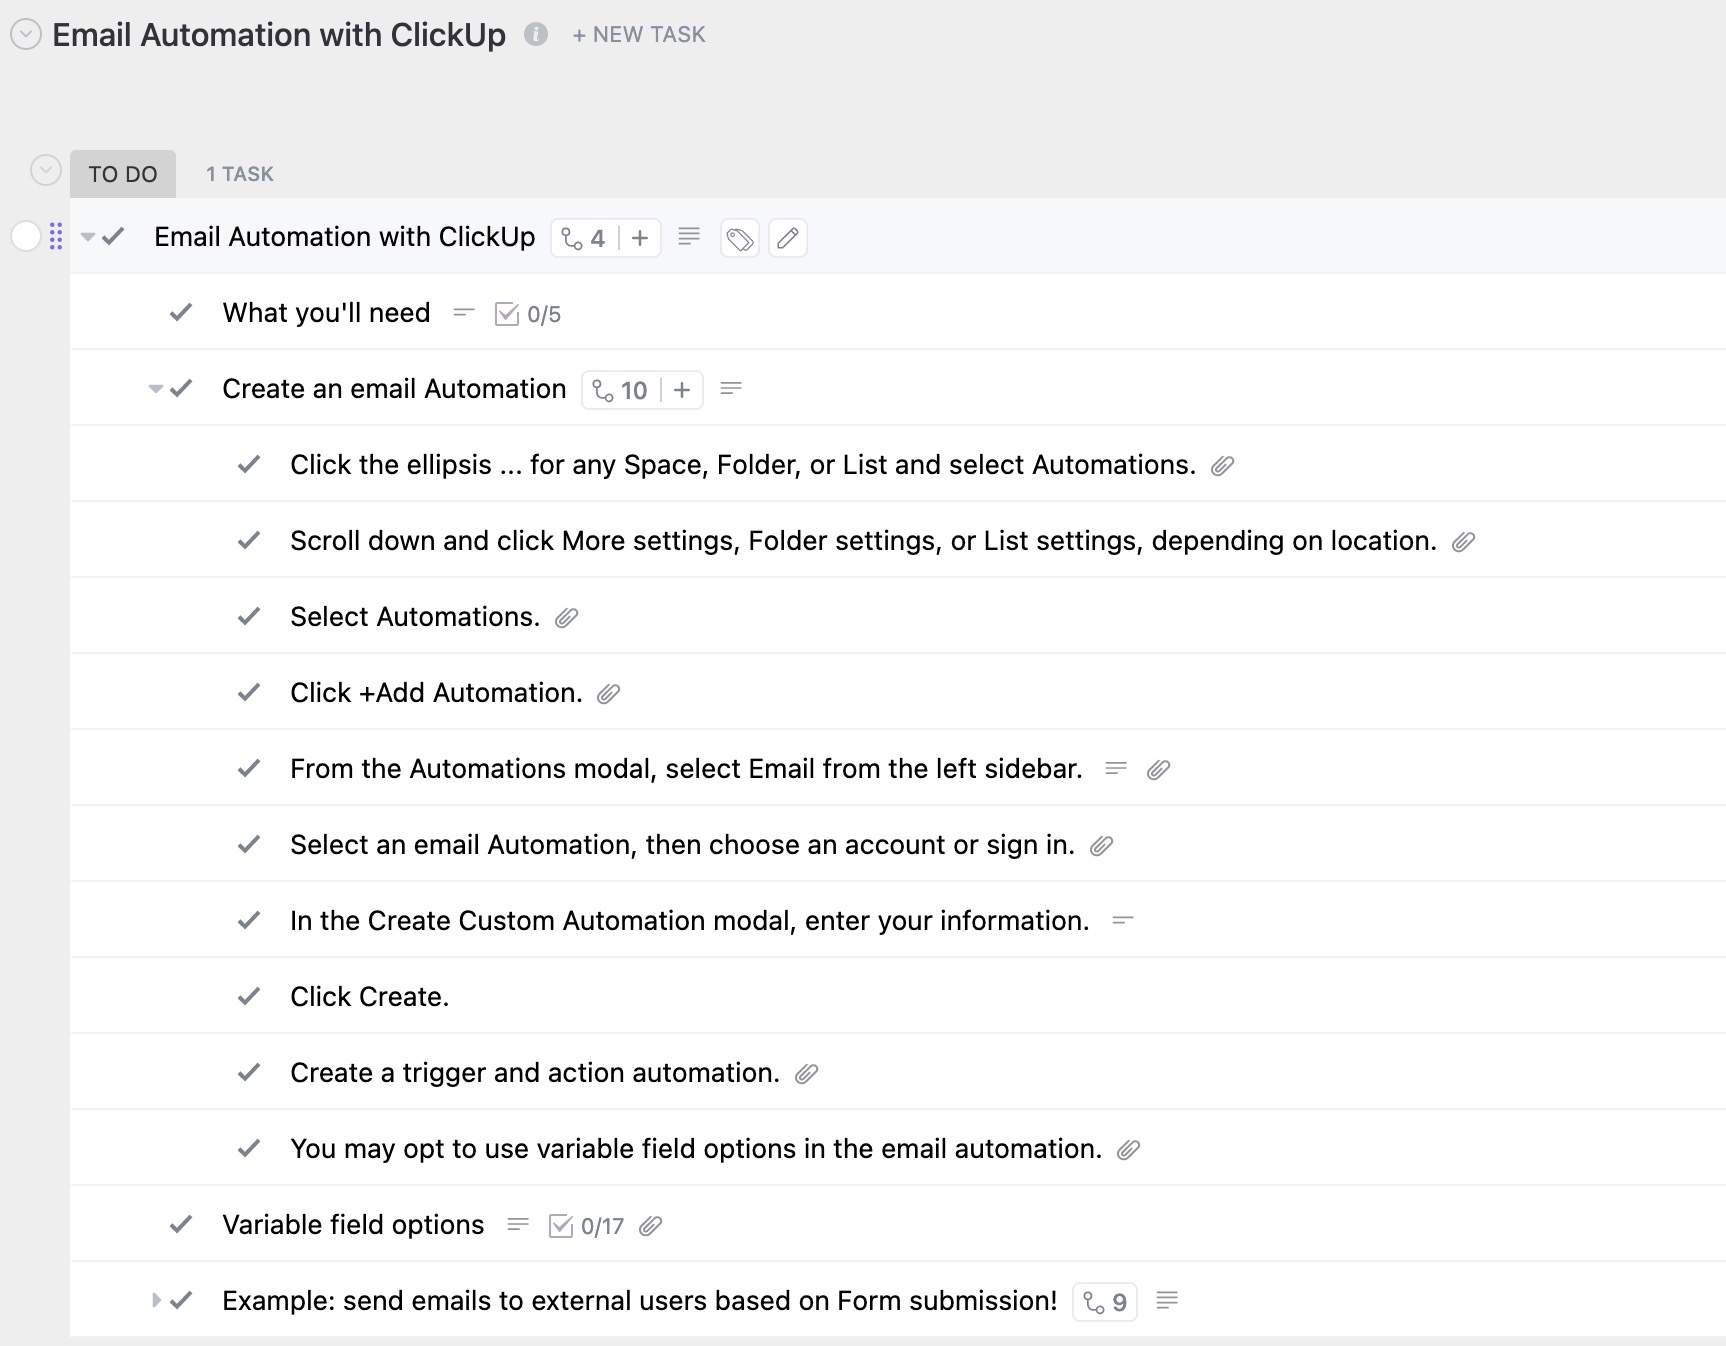 Email Automations can be used to automatically send emails from your ClickUp Workspace based on certain parameters! Automations eliminate the need for any manual input from you or any of your team members. Use this template as a guide for the step-by-step process of creating automated emails in ClickUp!